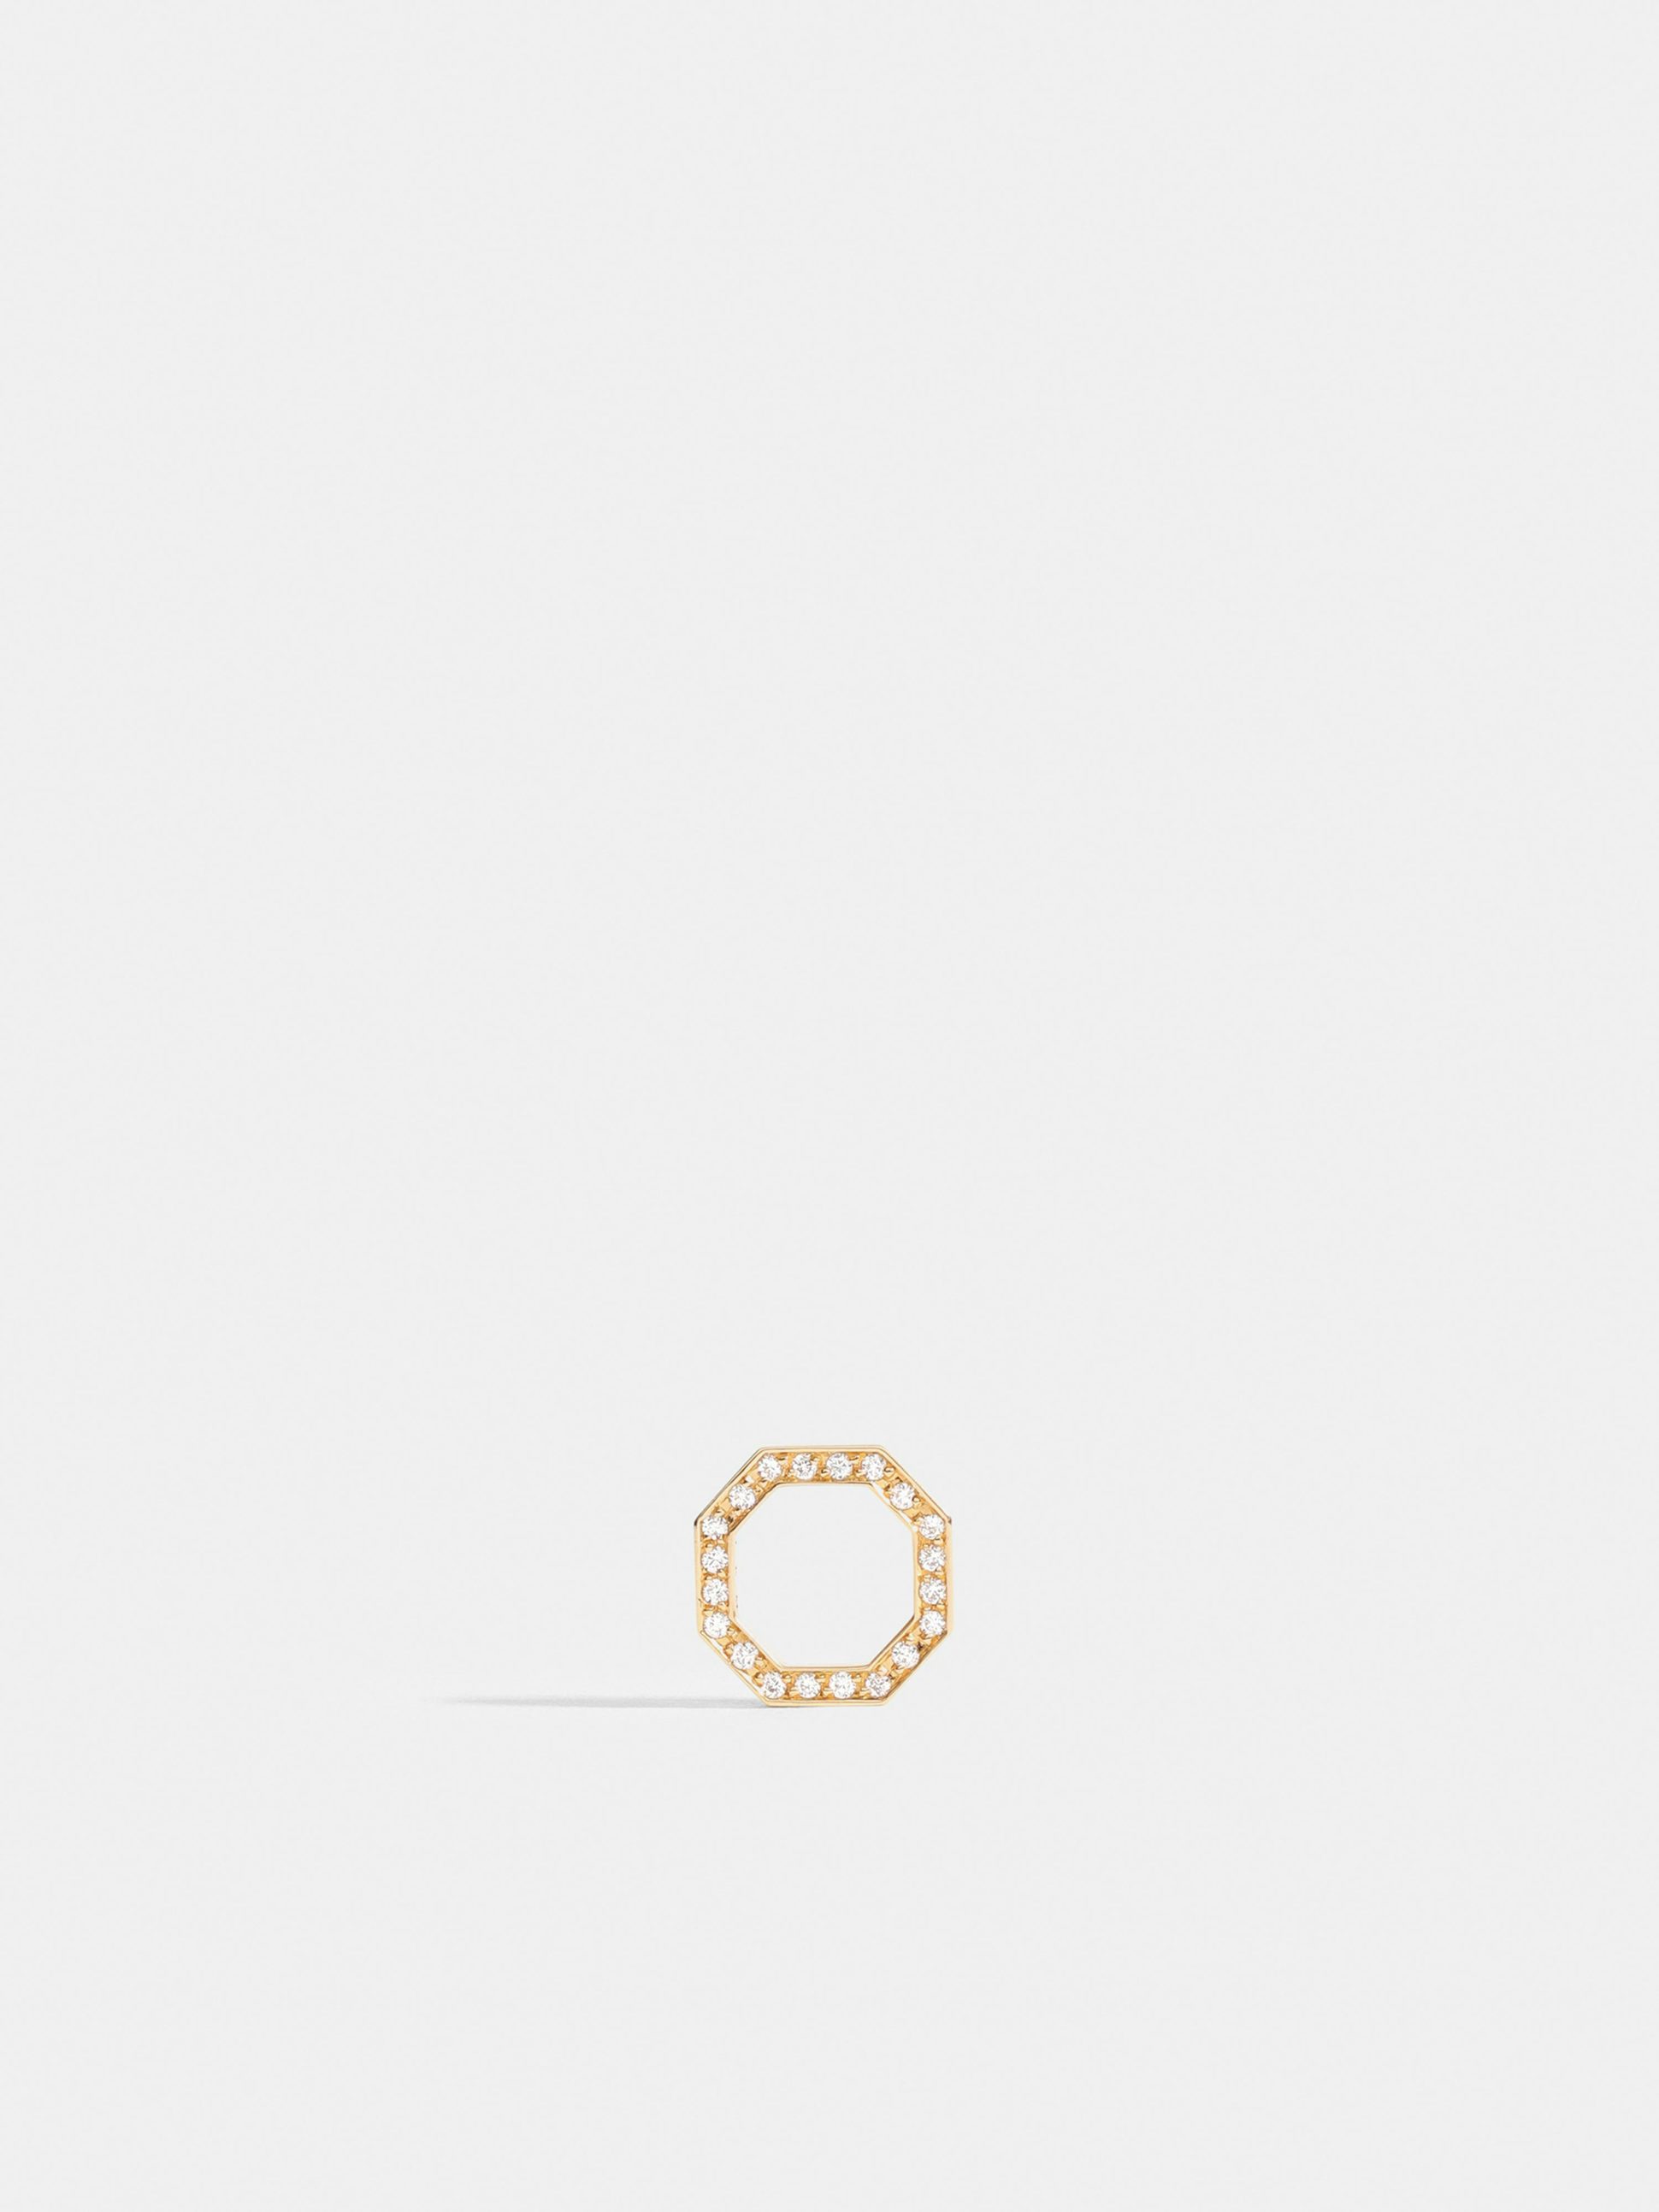 Octogone motif in 18k Fairmined ethical yellow gold, paved with lab-grown diamonds, on honey yellow.